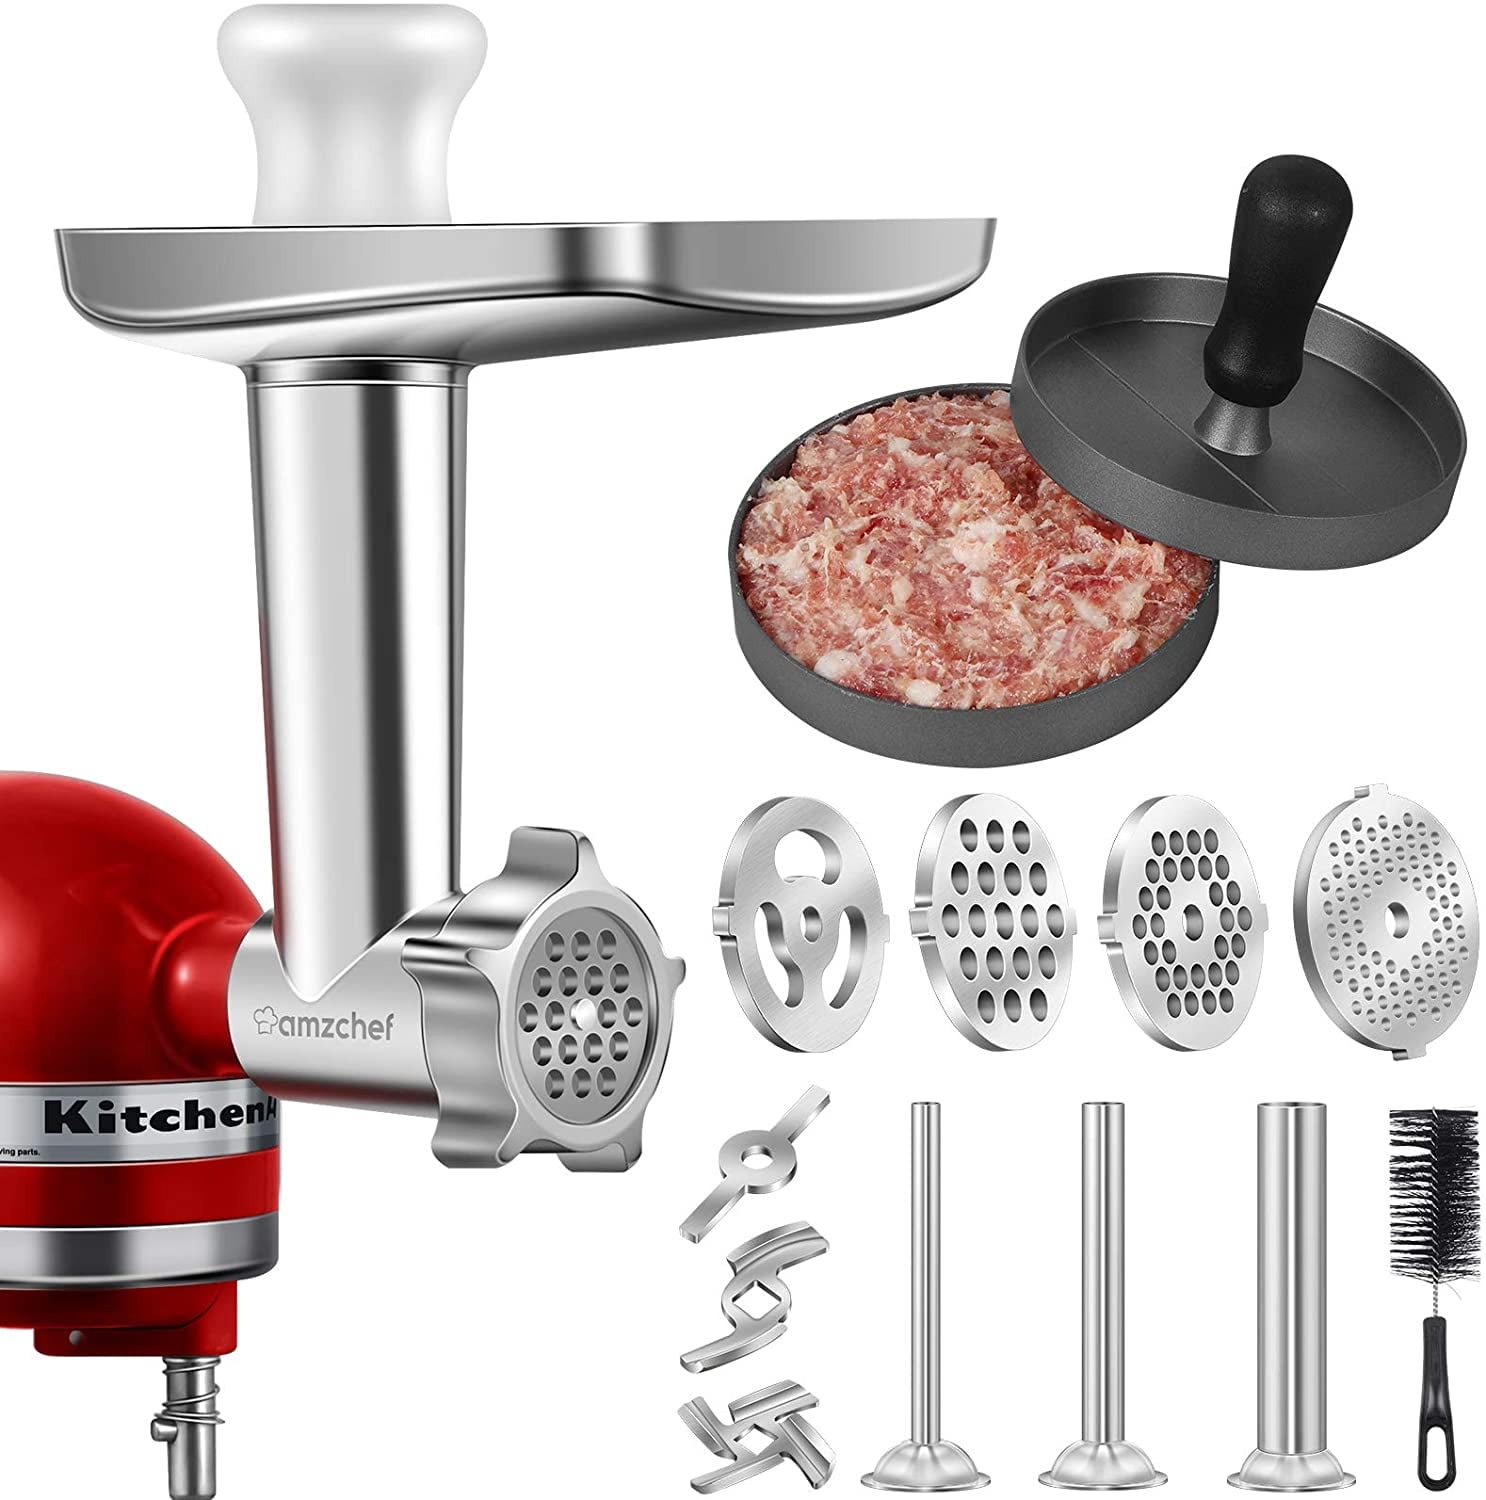 Stainless Steel Food Grinder Attachment fit KitchenAid Stand Mixers  Including Sausage Stuffer, Perfect Attachment for KitchenAid Mixers 